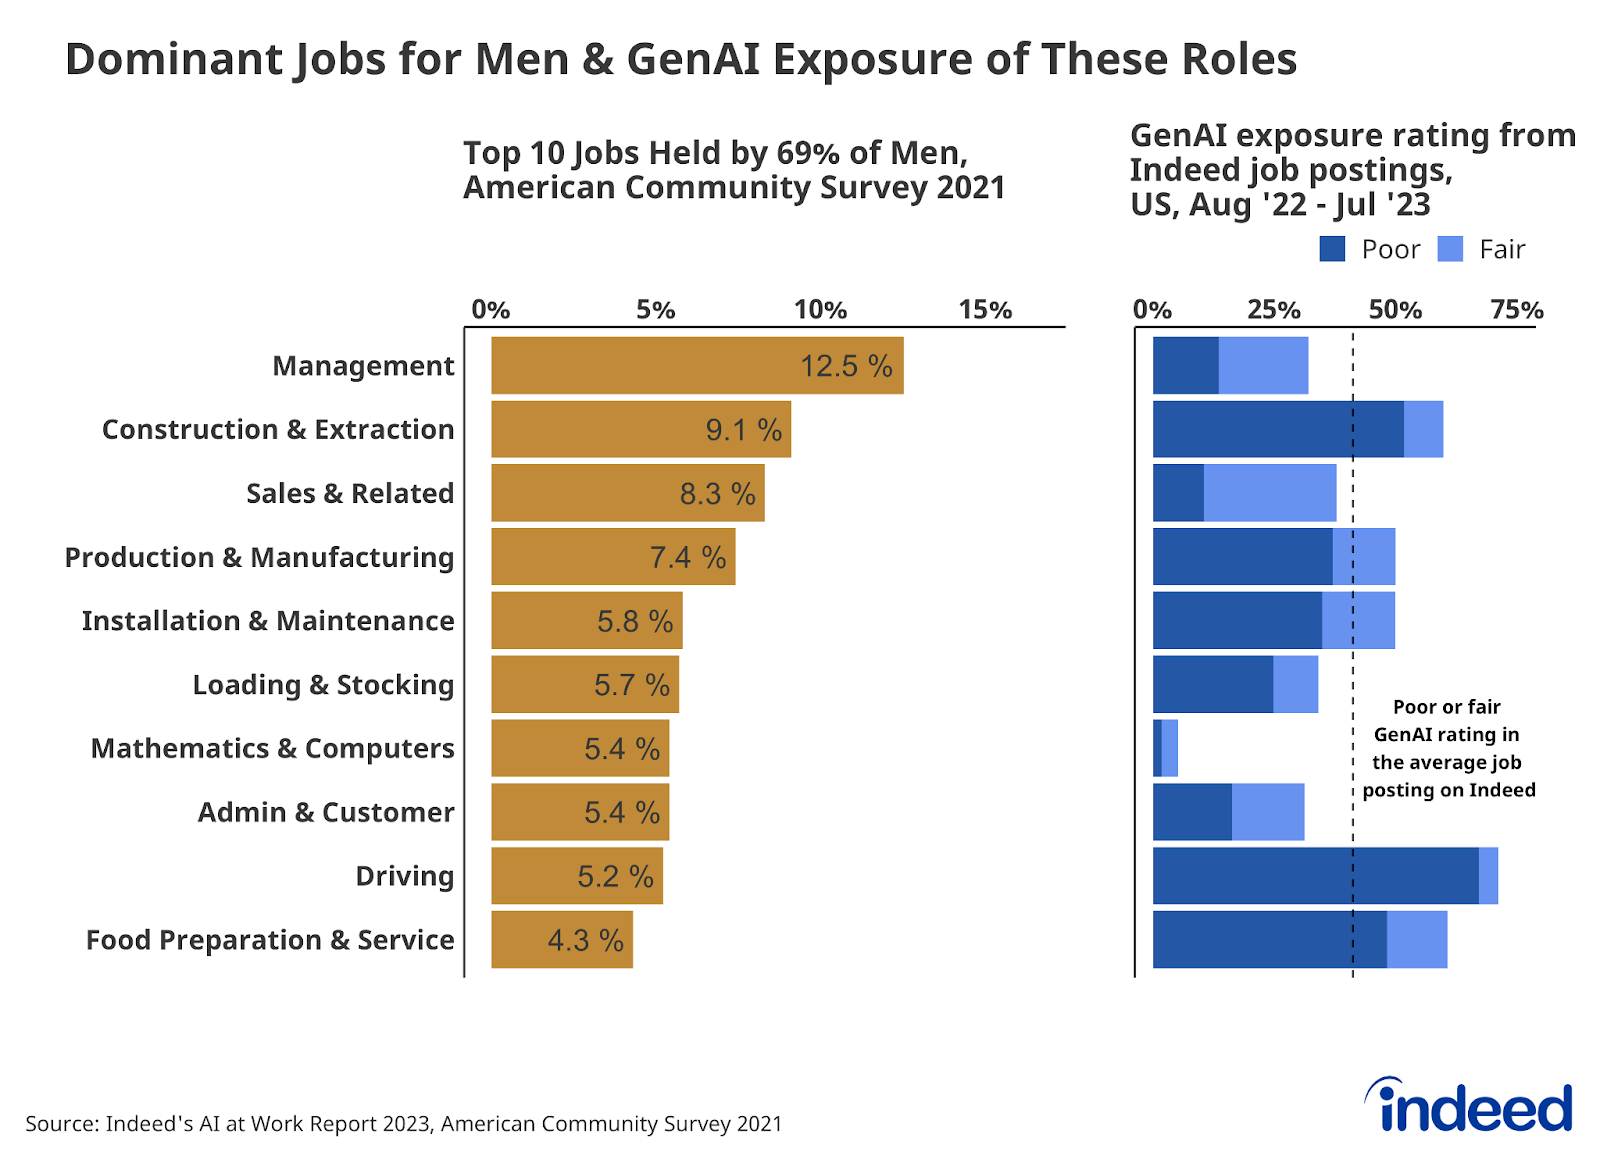 A series of two bar graphs titled "Dominant jobs for men & GenAI exposure of these roles," shows the top 10 jobs held by 69% of men and the corresponding GenAI exposure rating of those jobs. Management was the most common type of job at 12.5%, while Food Preparation & Service was the rarest. 